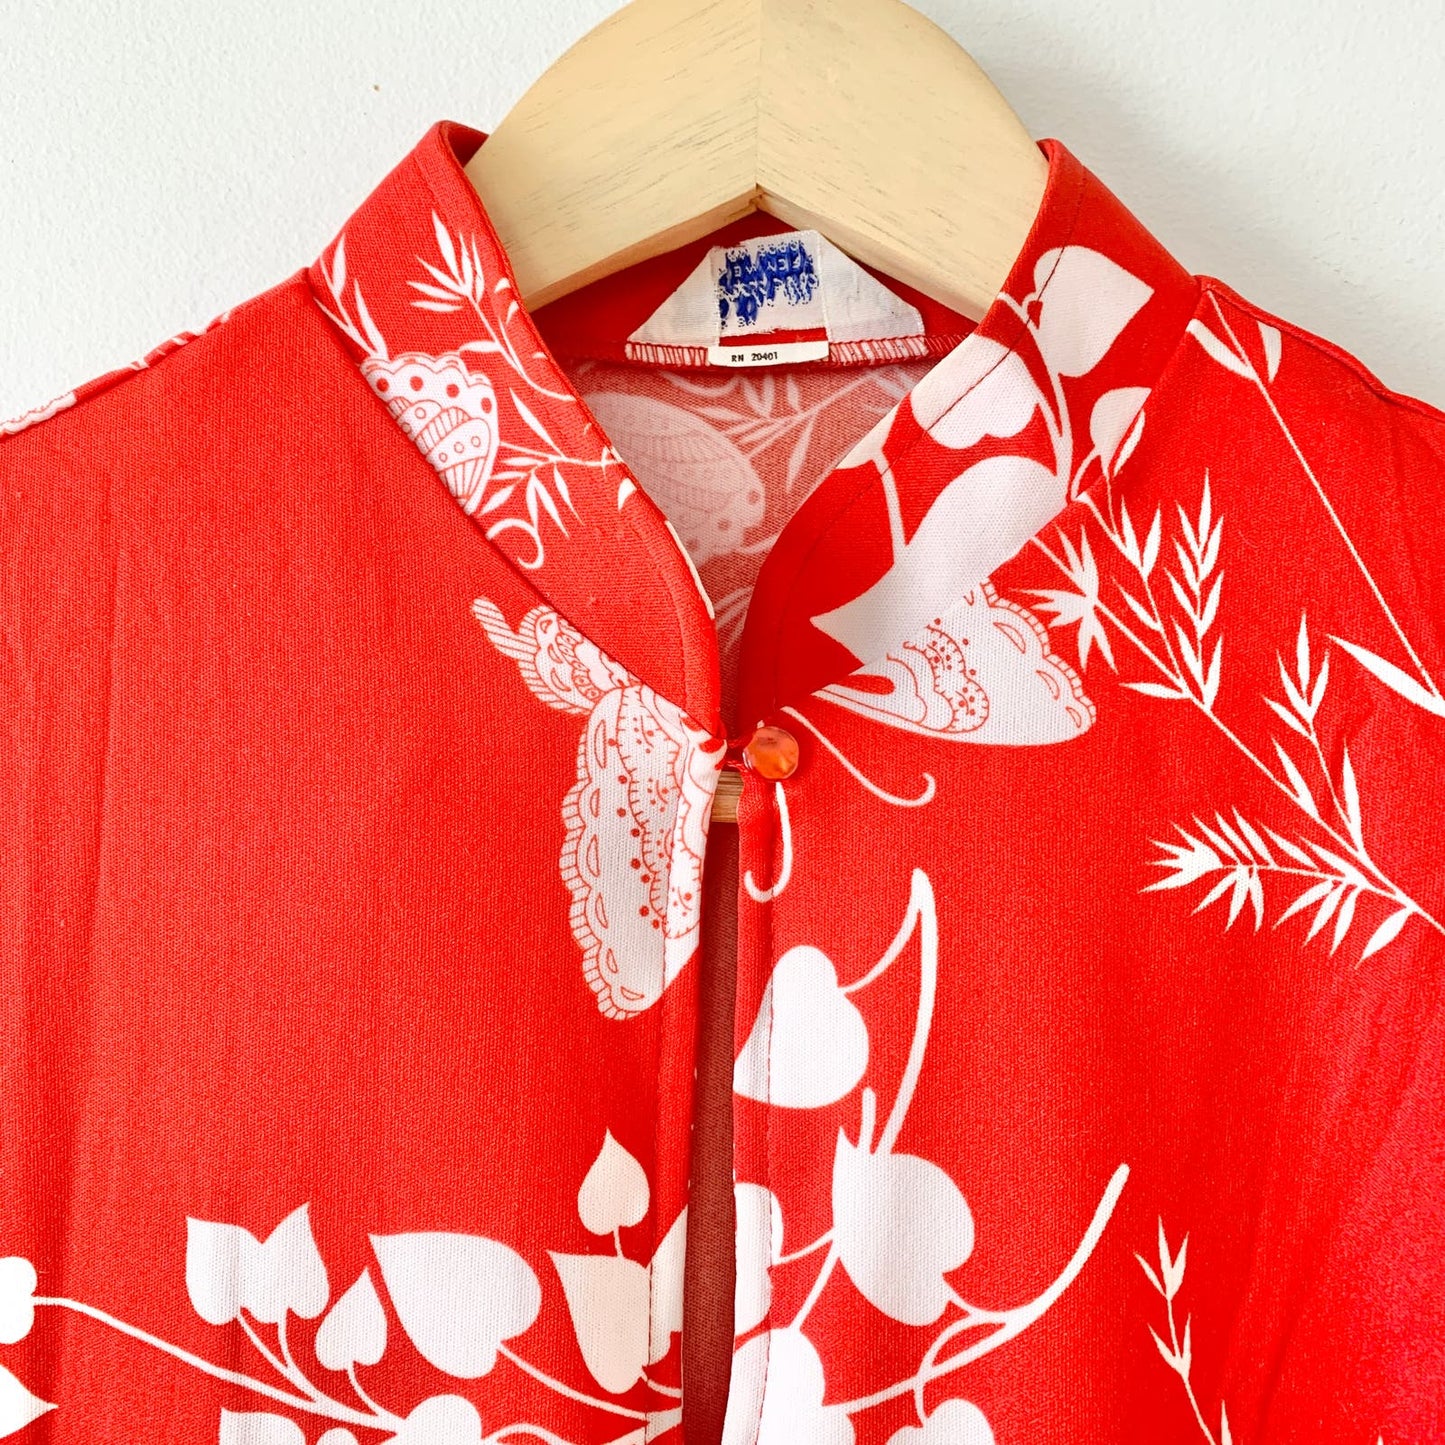 MARDI MODES NYC Vintage 1970s Butterfly Red White Blouse Union Made